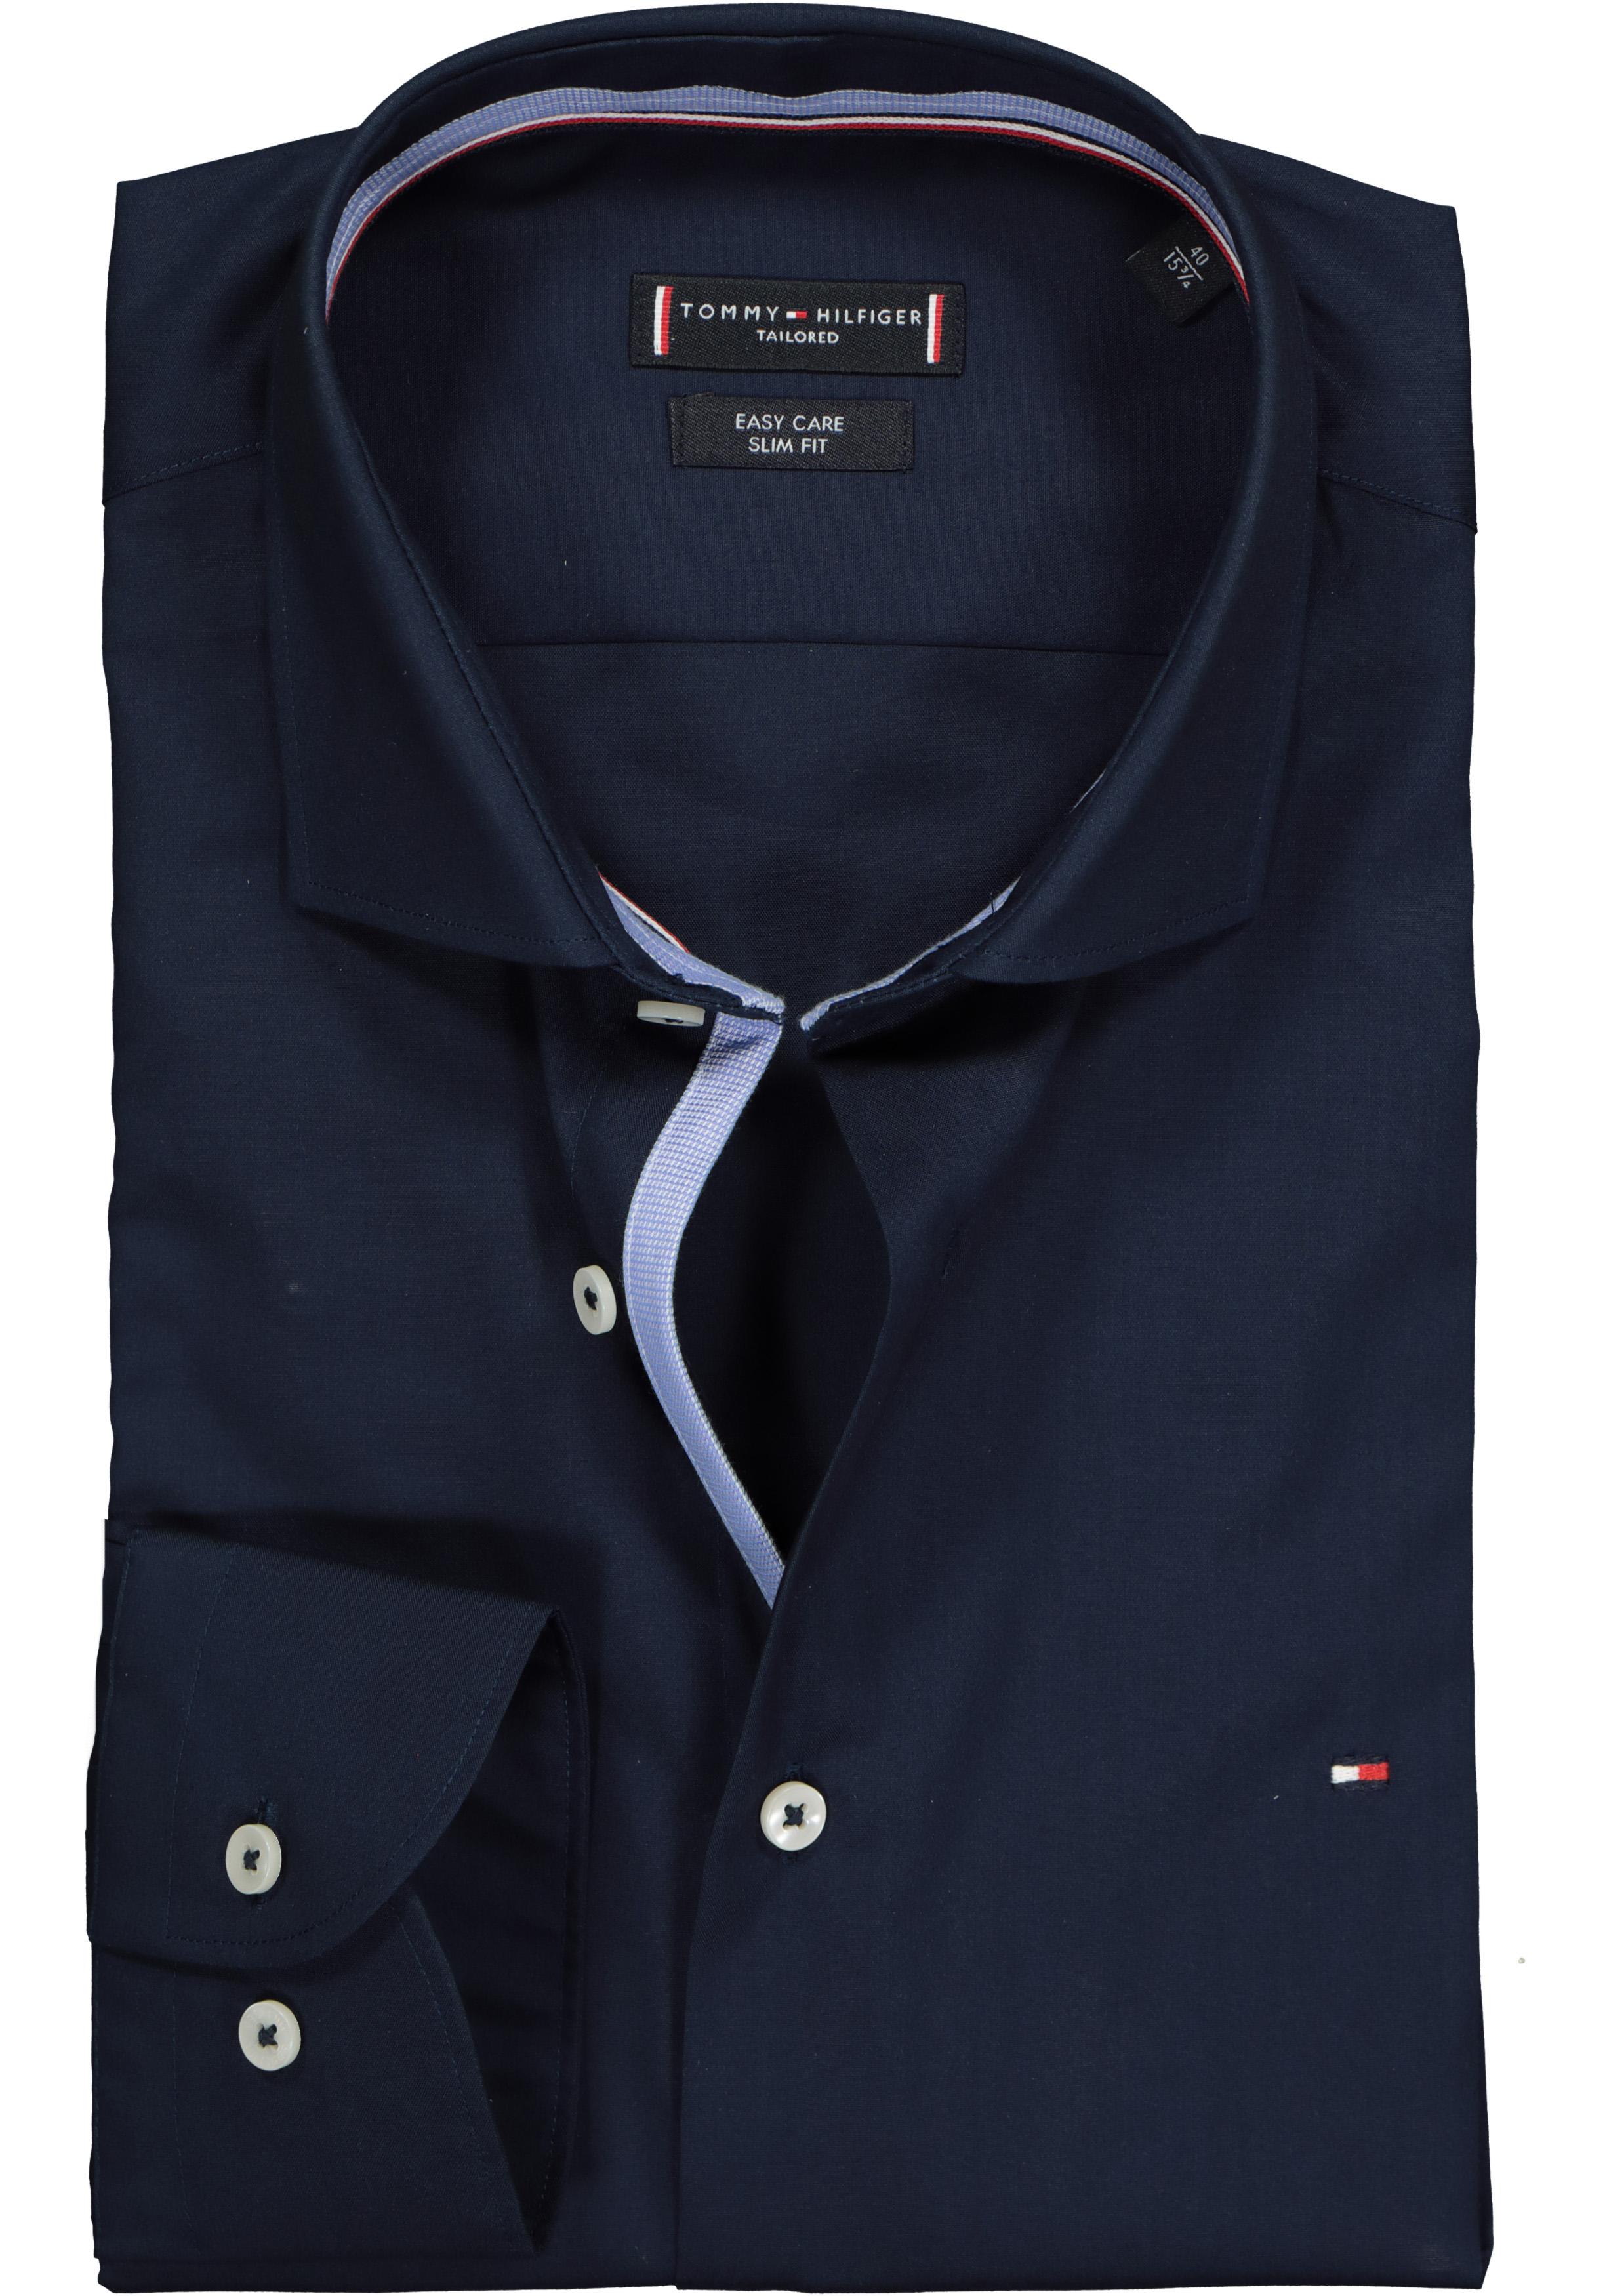 Tommy Hilfiger Classic slim fit overhemd, donkerblauw (contrast)